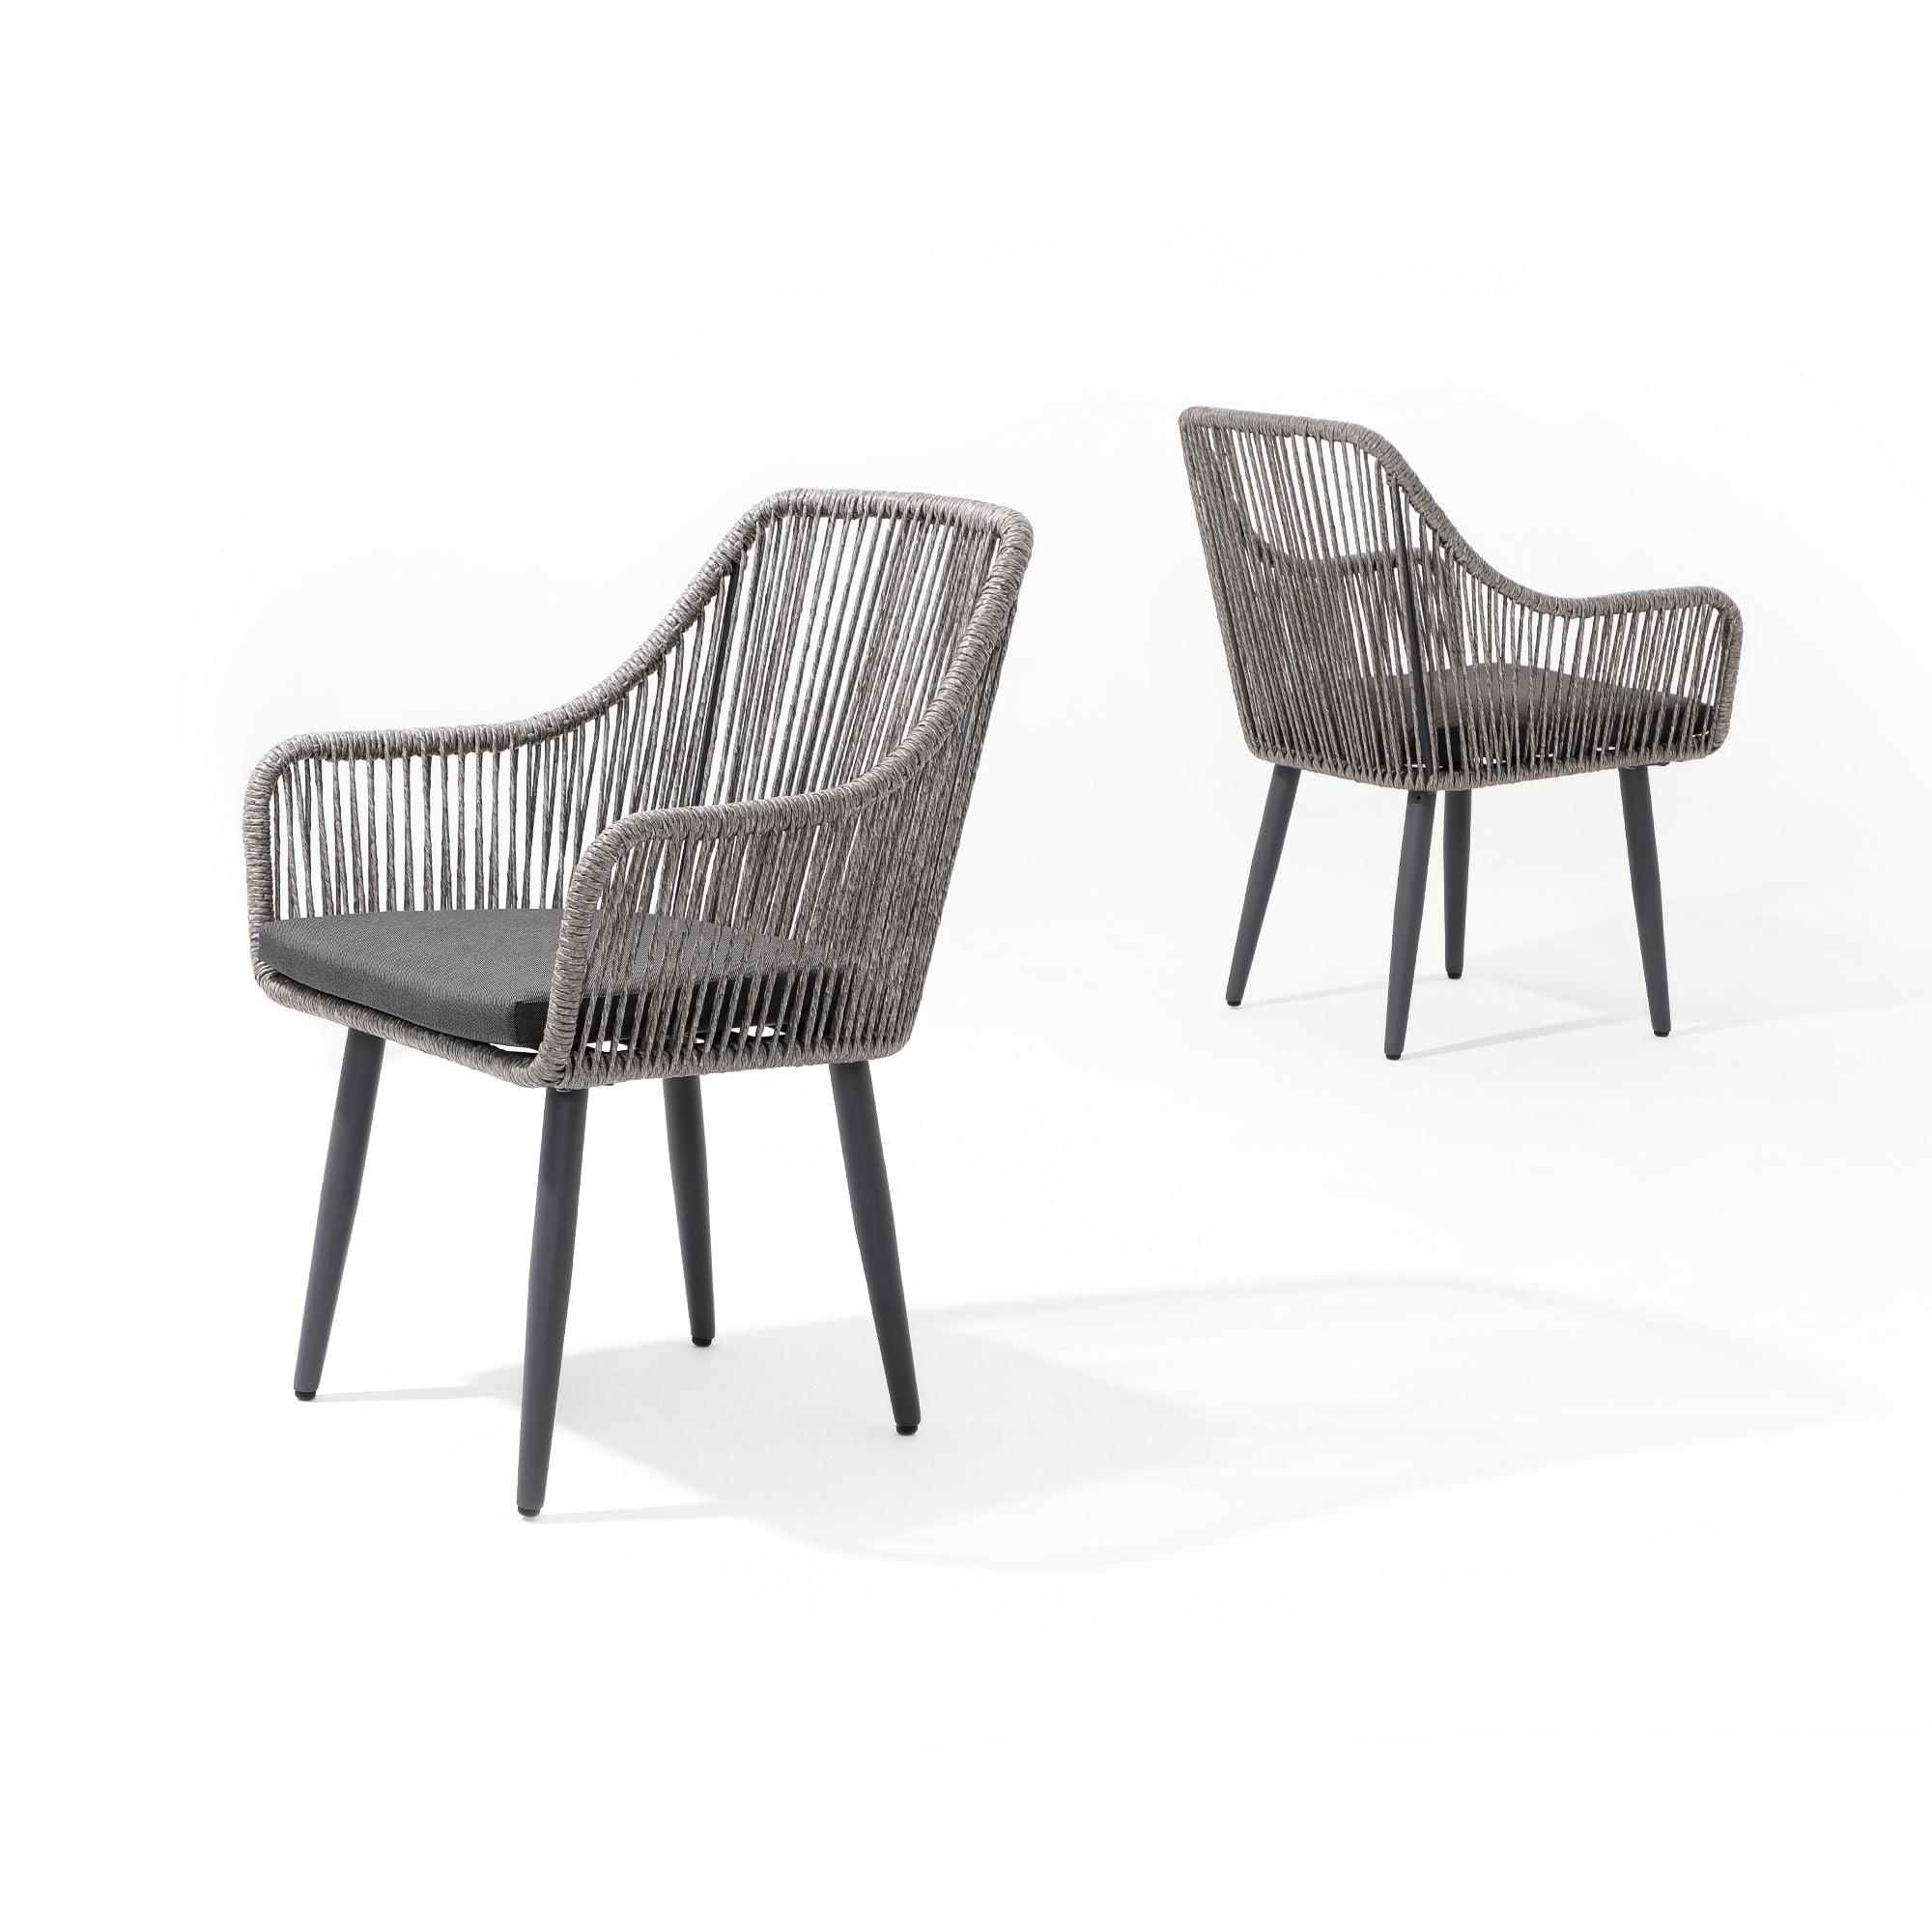 Hallerbos Modern Wicker Outdoor Chairs, 2 grey rattan Dining Chairs with steel frame and grey cushion, two different angles- Jardina Furniture#Color_Grey